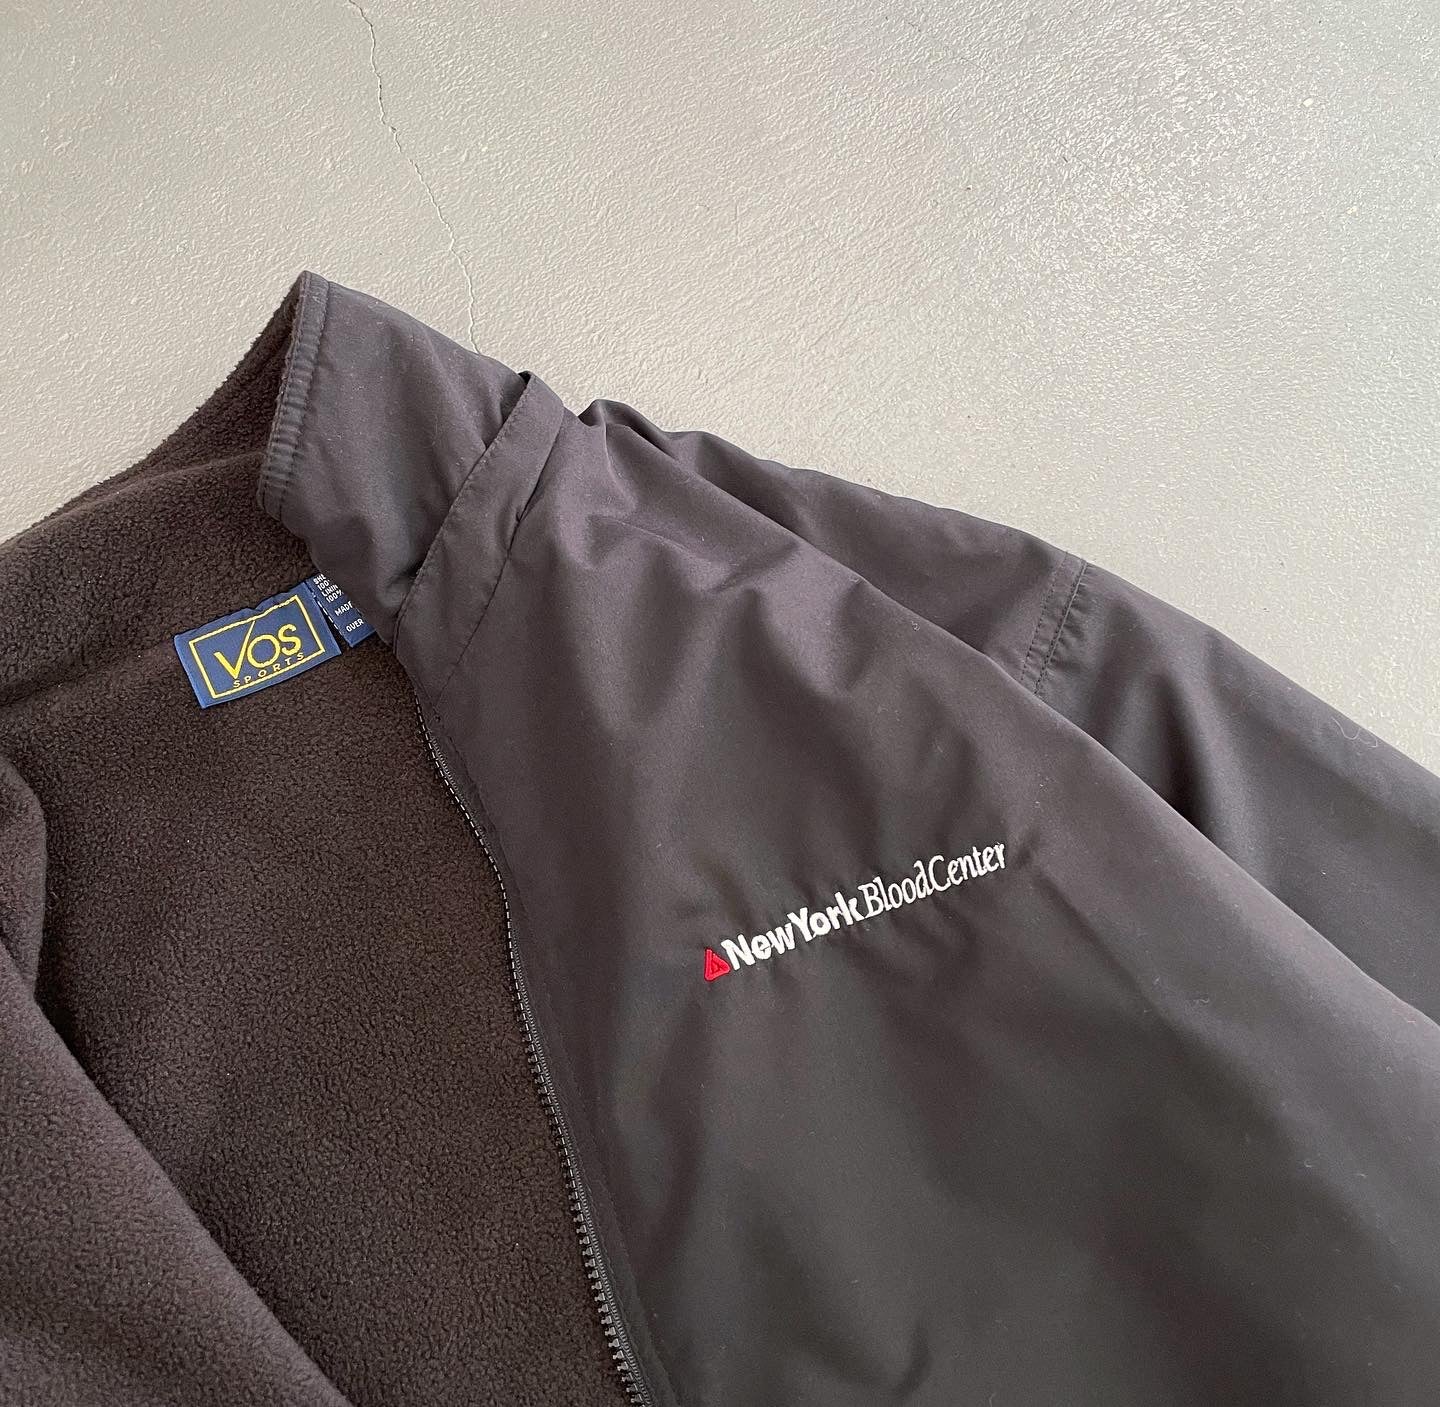 New York Blood Center Fleece Lined Jacket with Hood